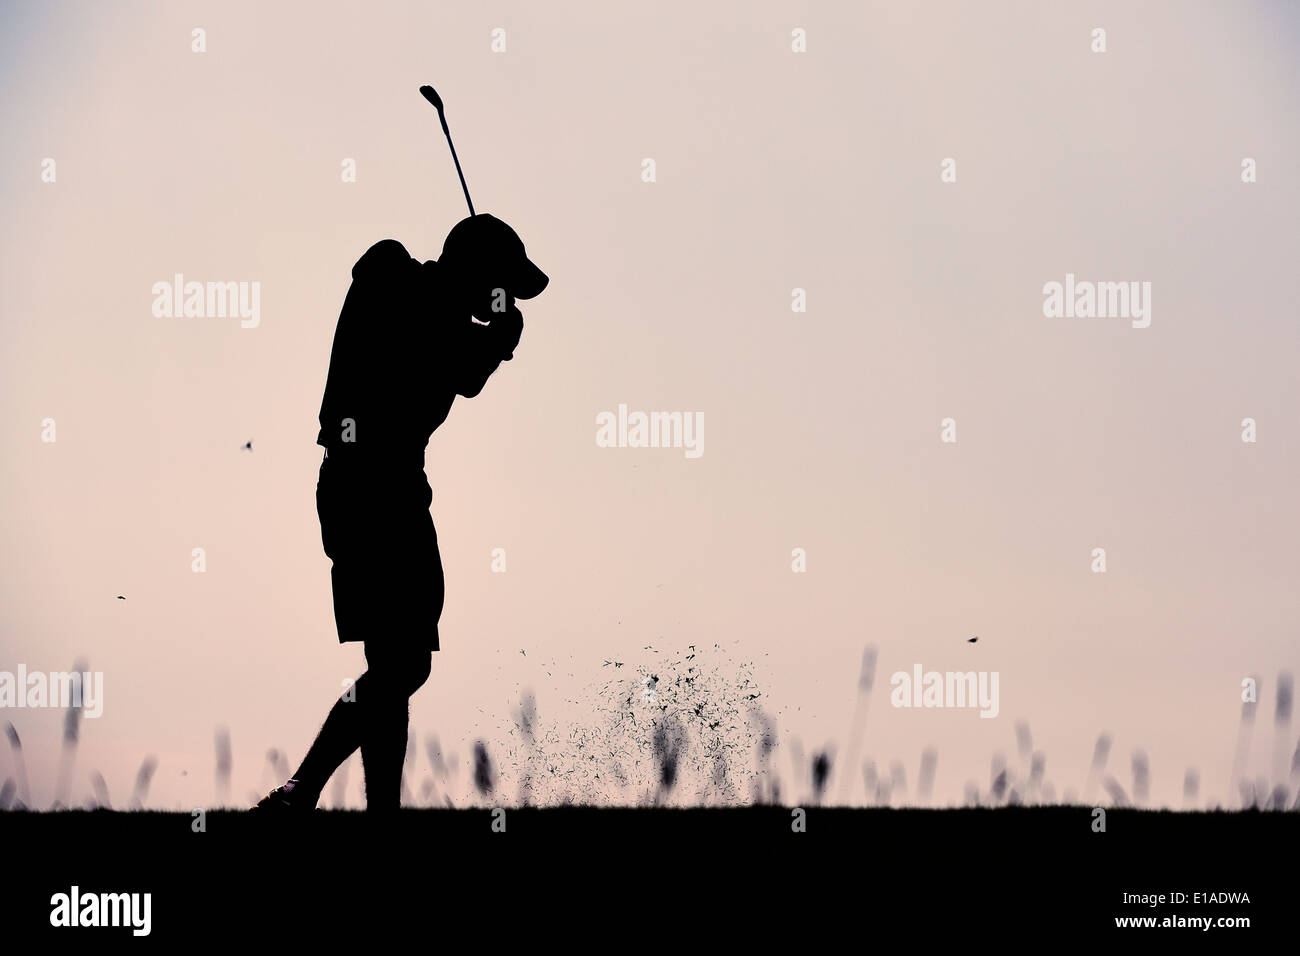 Silhouette of golf player taking a shot at sunset Stock Photo